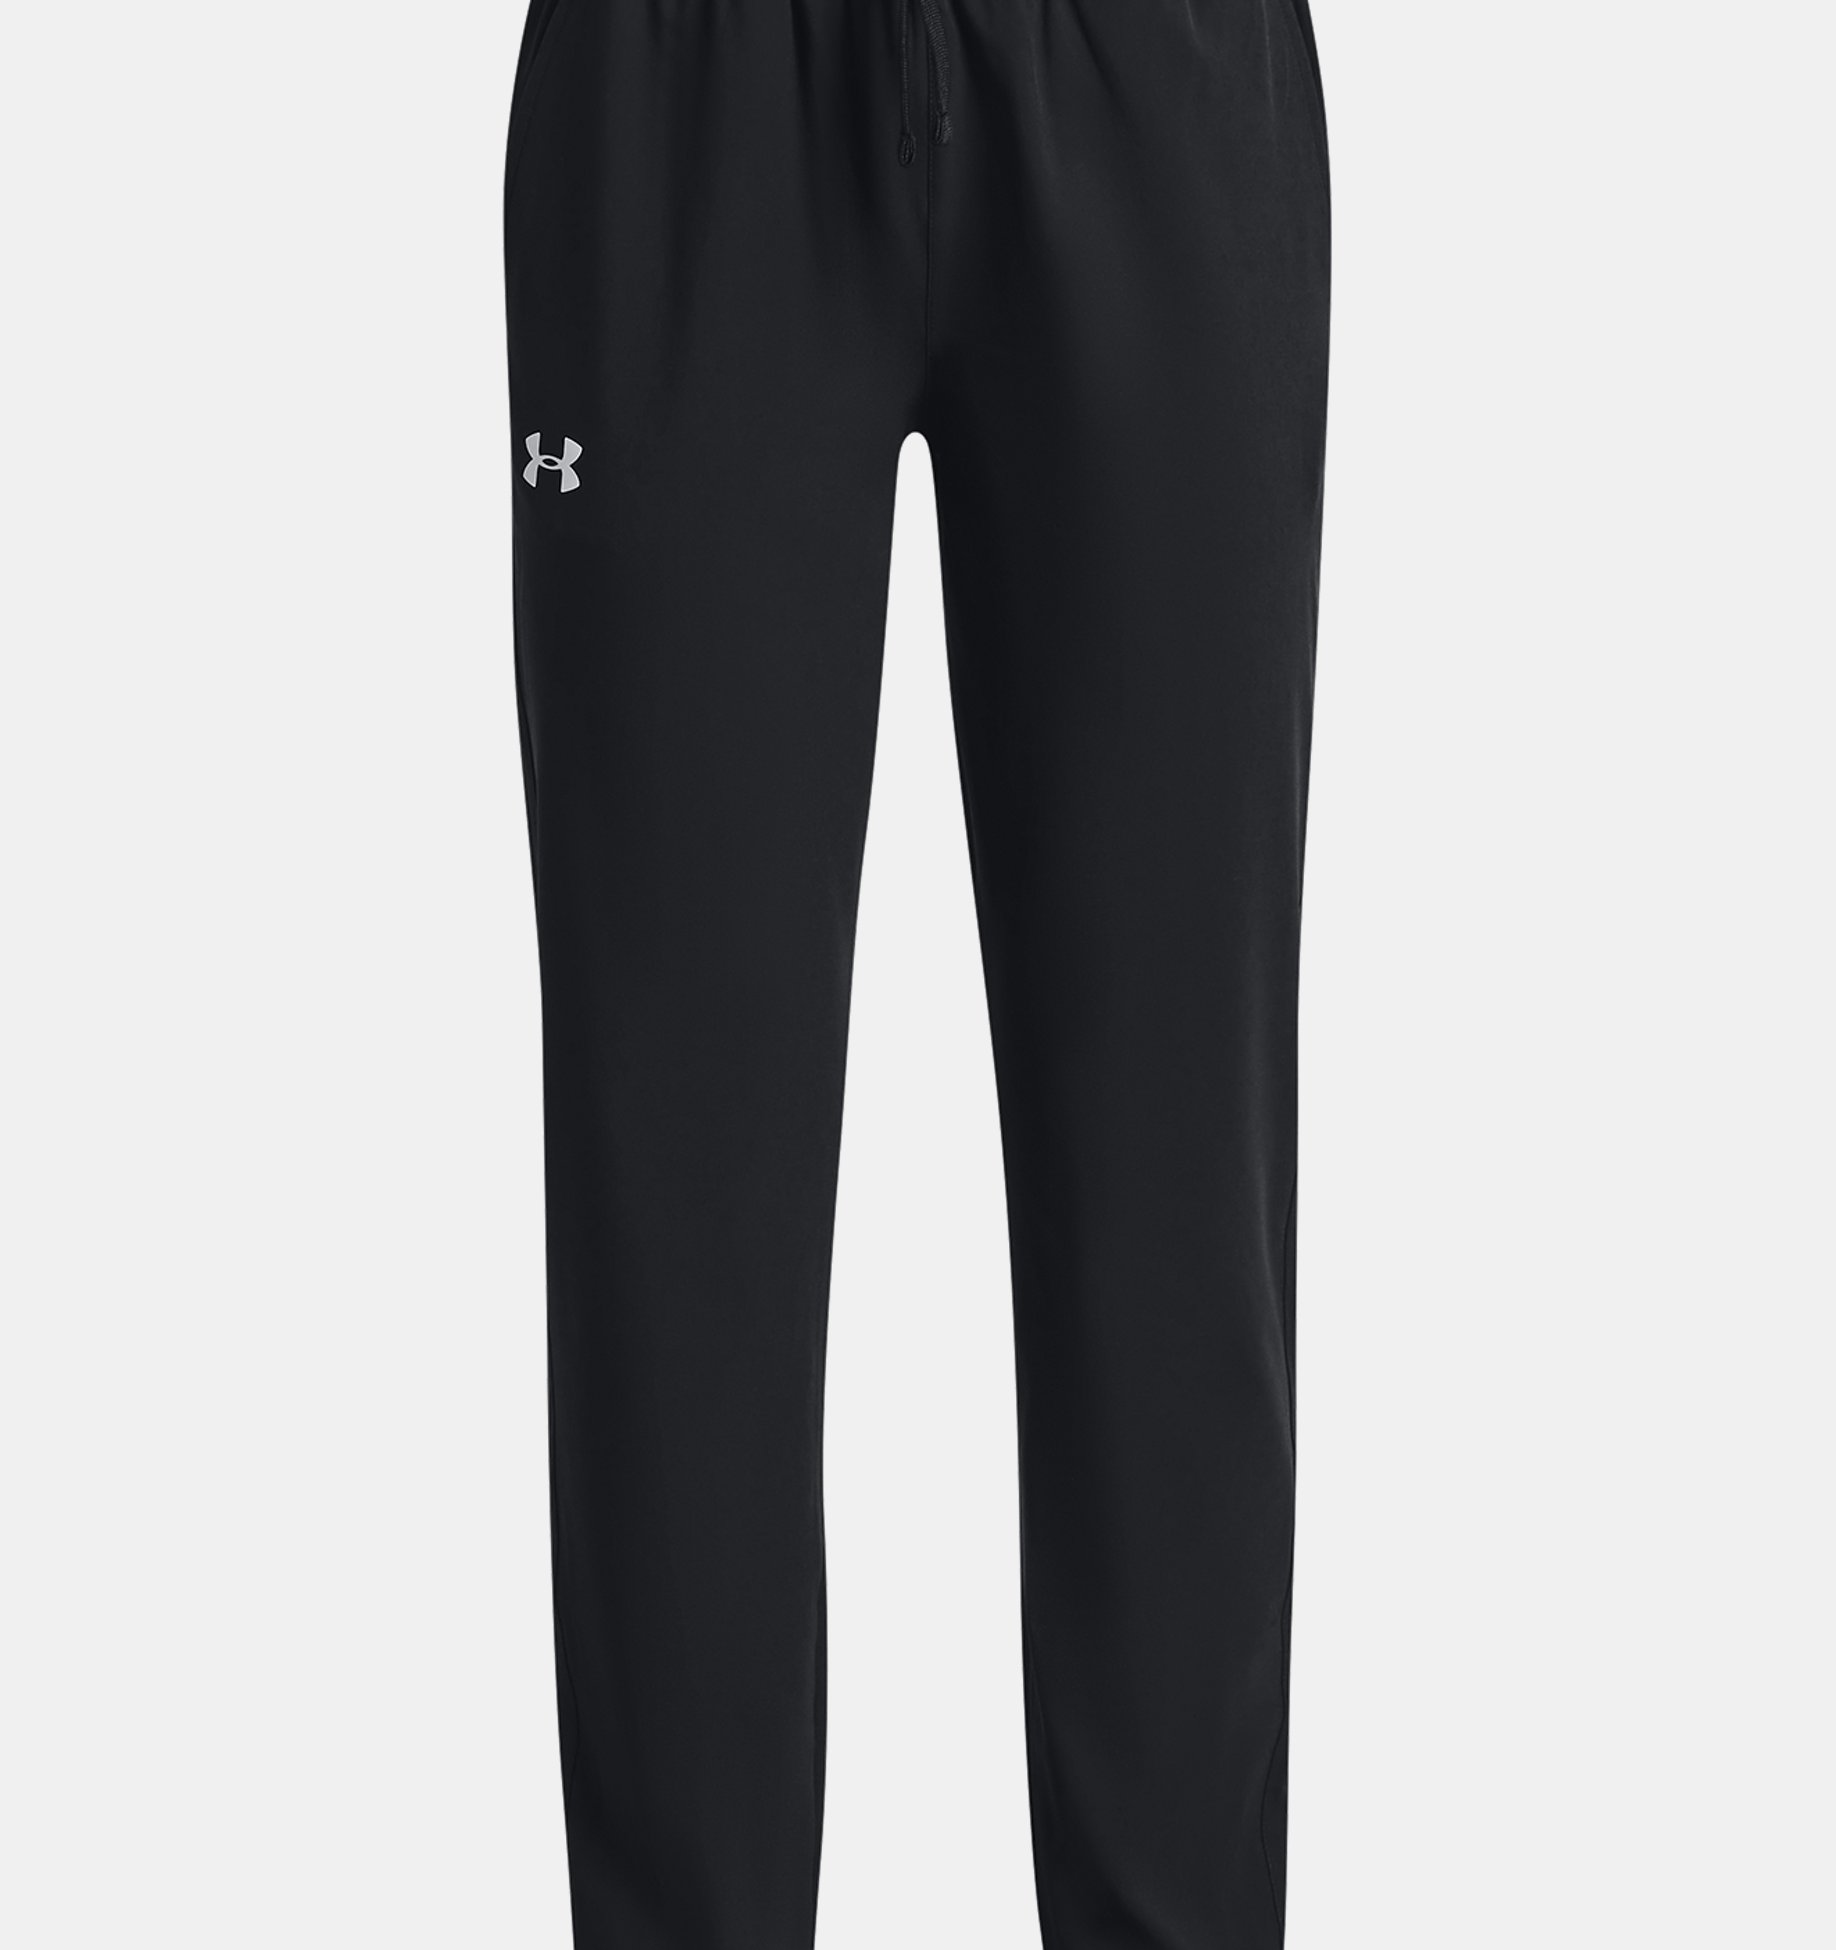 https://underarmour.scene7.com/is/image/Underarmour/PS1373004-001_HF?rp=standard-0pad|pdpZoomDesktop&scl=0.72&fmt=jpg&qlt=85&resMode=sharp2&cache=on,on&bgc=f0f0f0&wid=1836&hei=1950&size=1500,1500